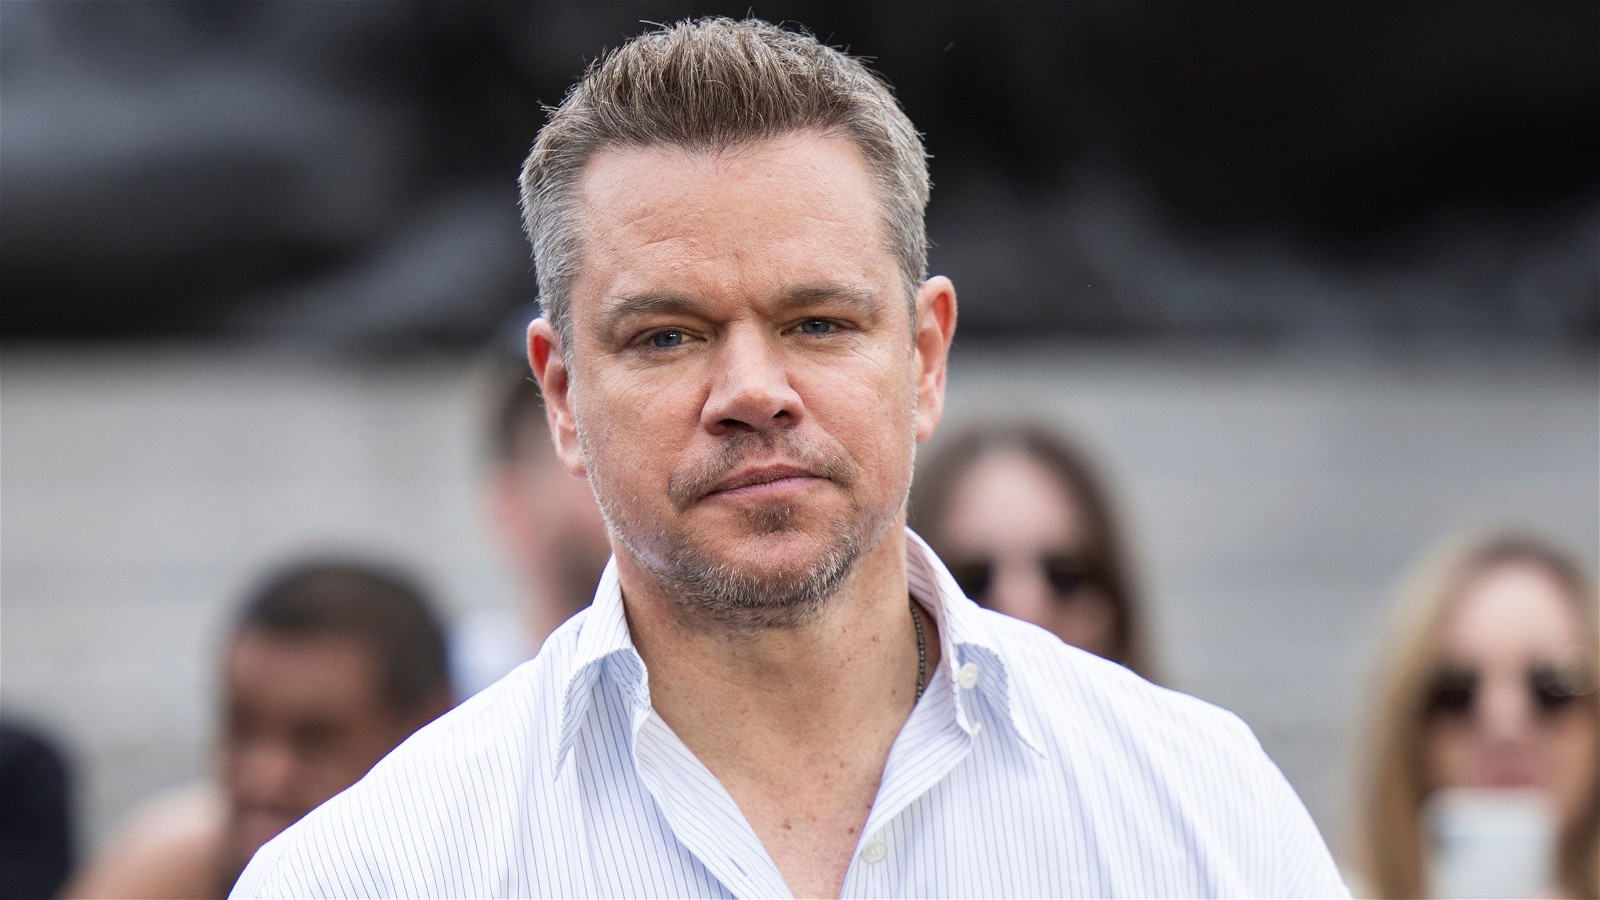 Matt Damon is one of Hollywood's most loved actors of all time